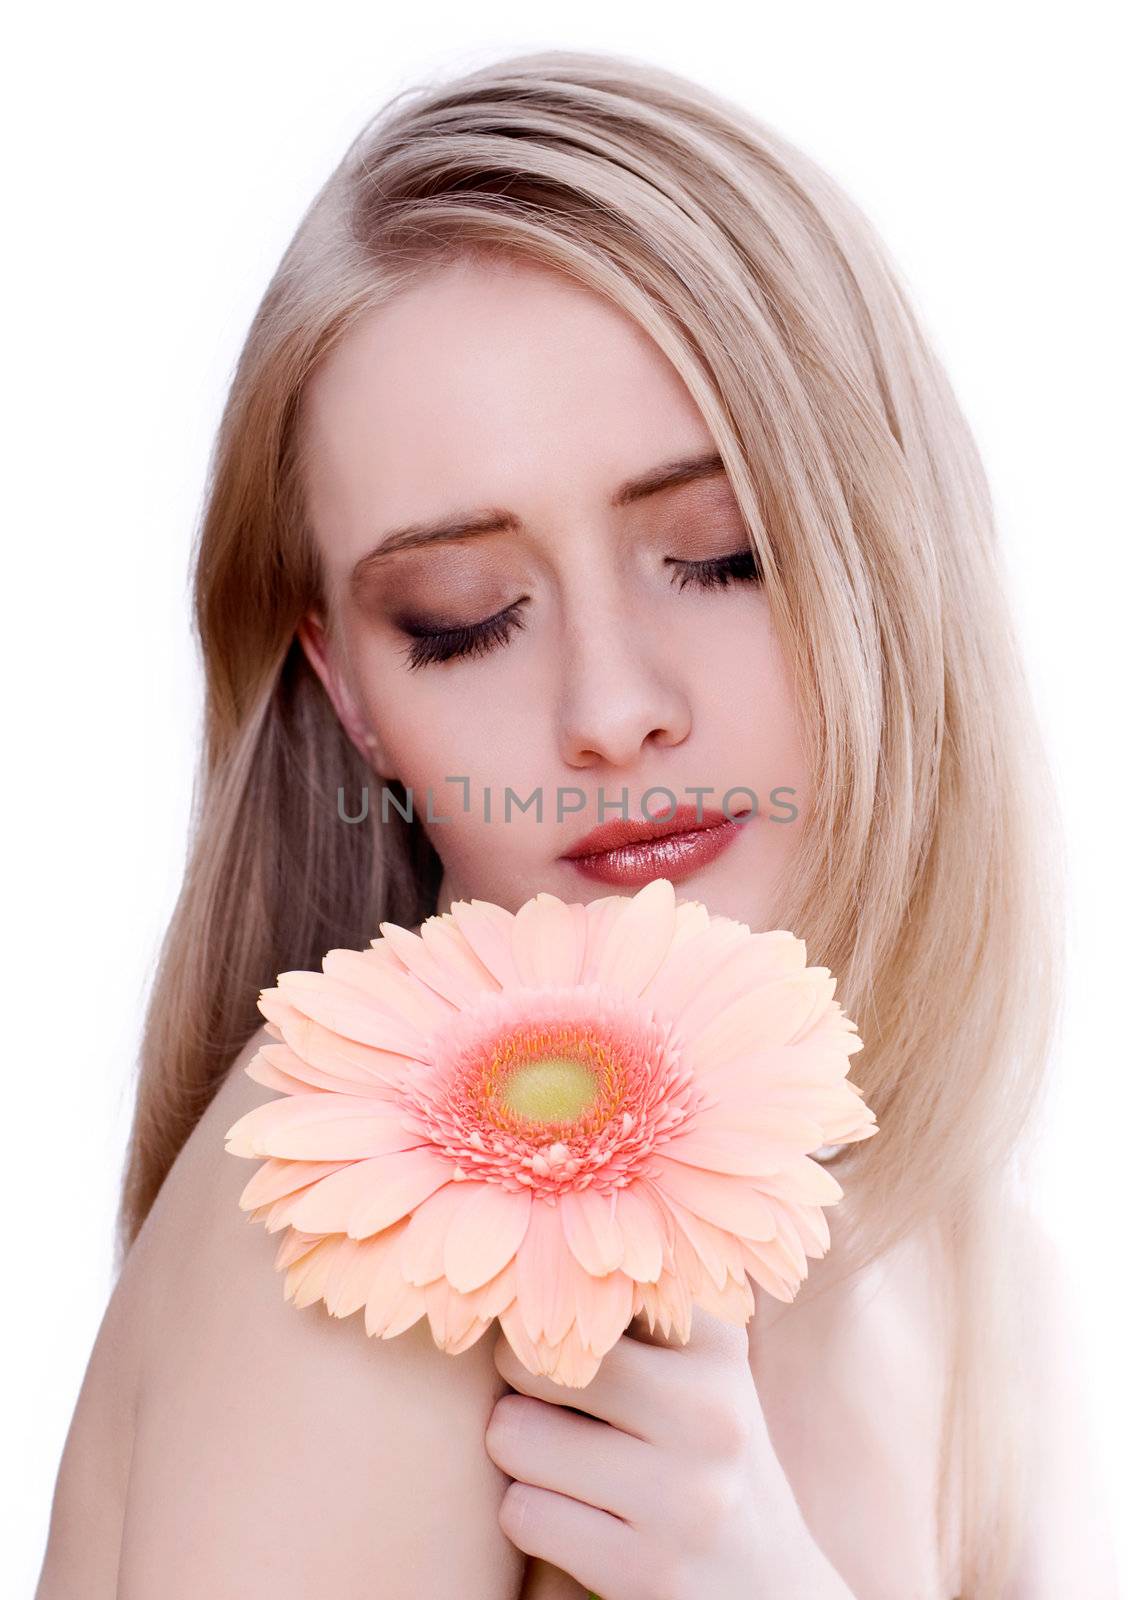 Skincare of young beautiful woman face with flower by mmajk